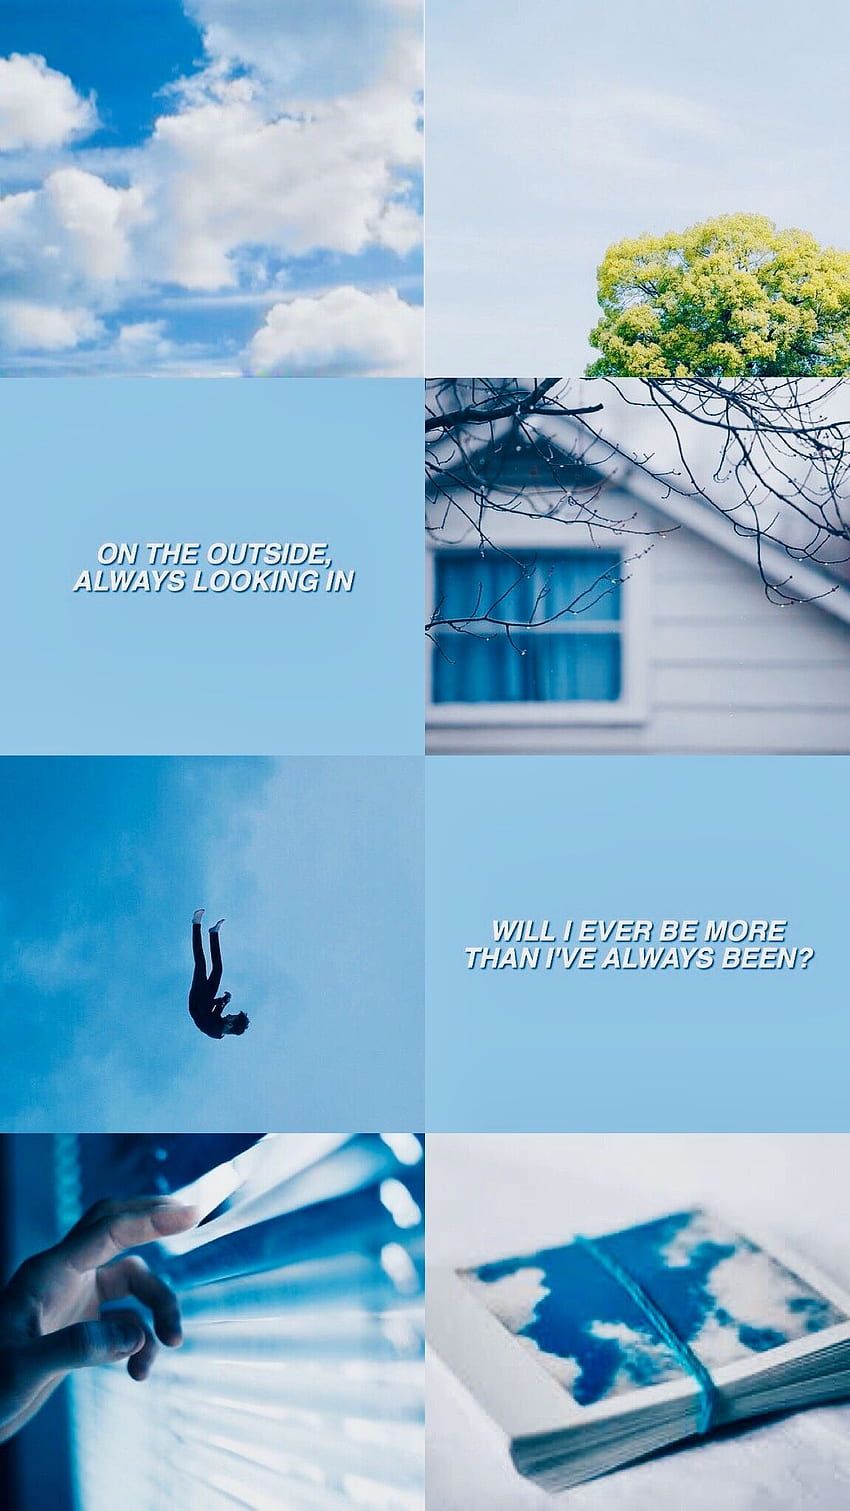 Aesthetic collage of a person diving into water, a book, a tree, and a house - Aqua